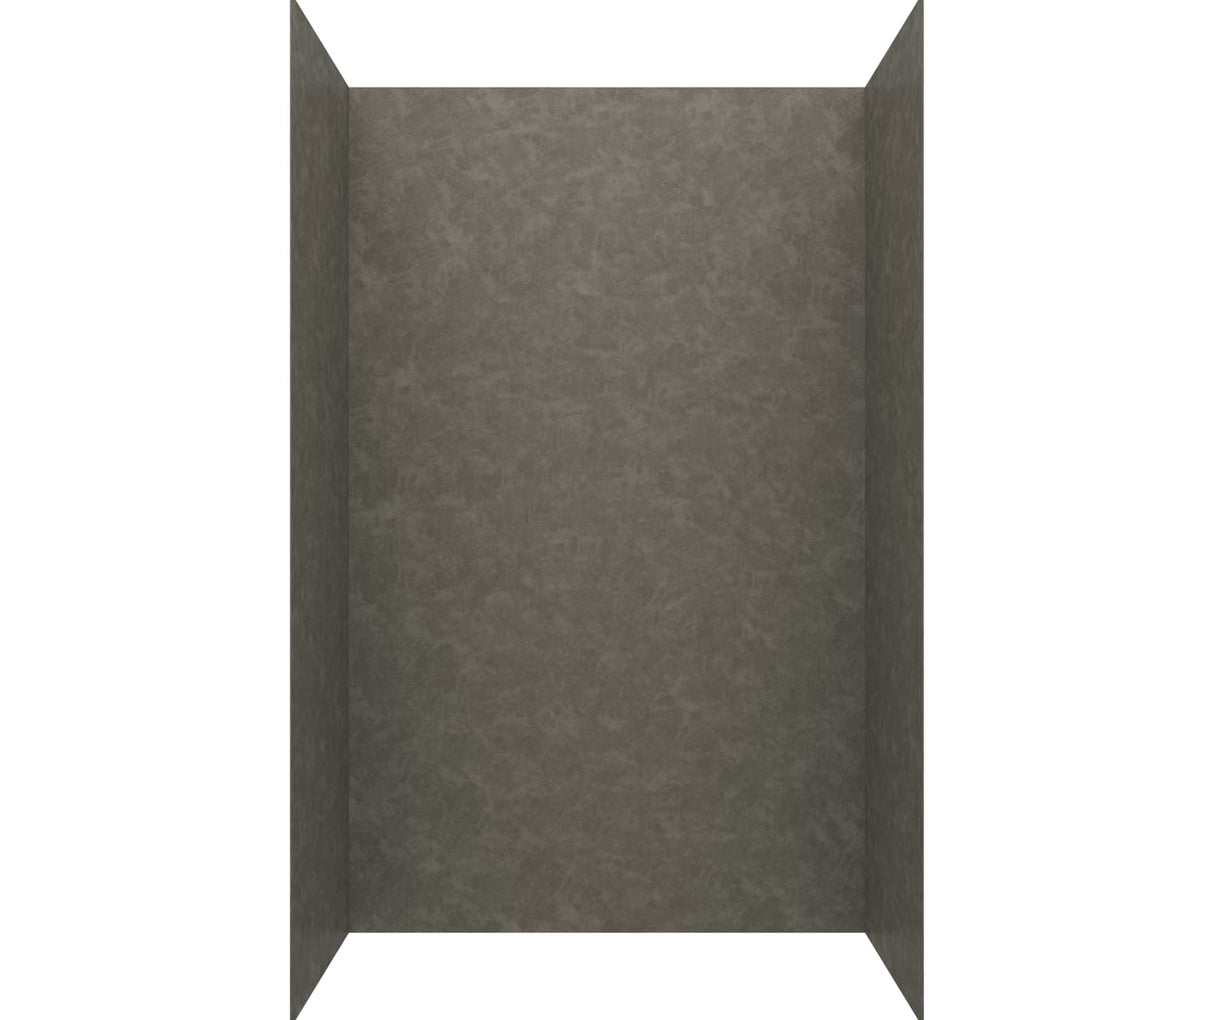 Swanstone SMMK96-3636 36 x 36 x 96 Swanstone Smooth Glue up Shower Wall Kit in Charcoal Gray SMMK963636.209